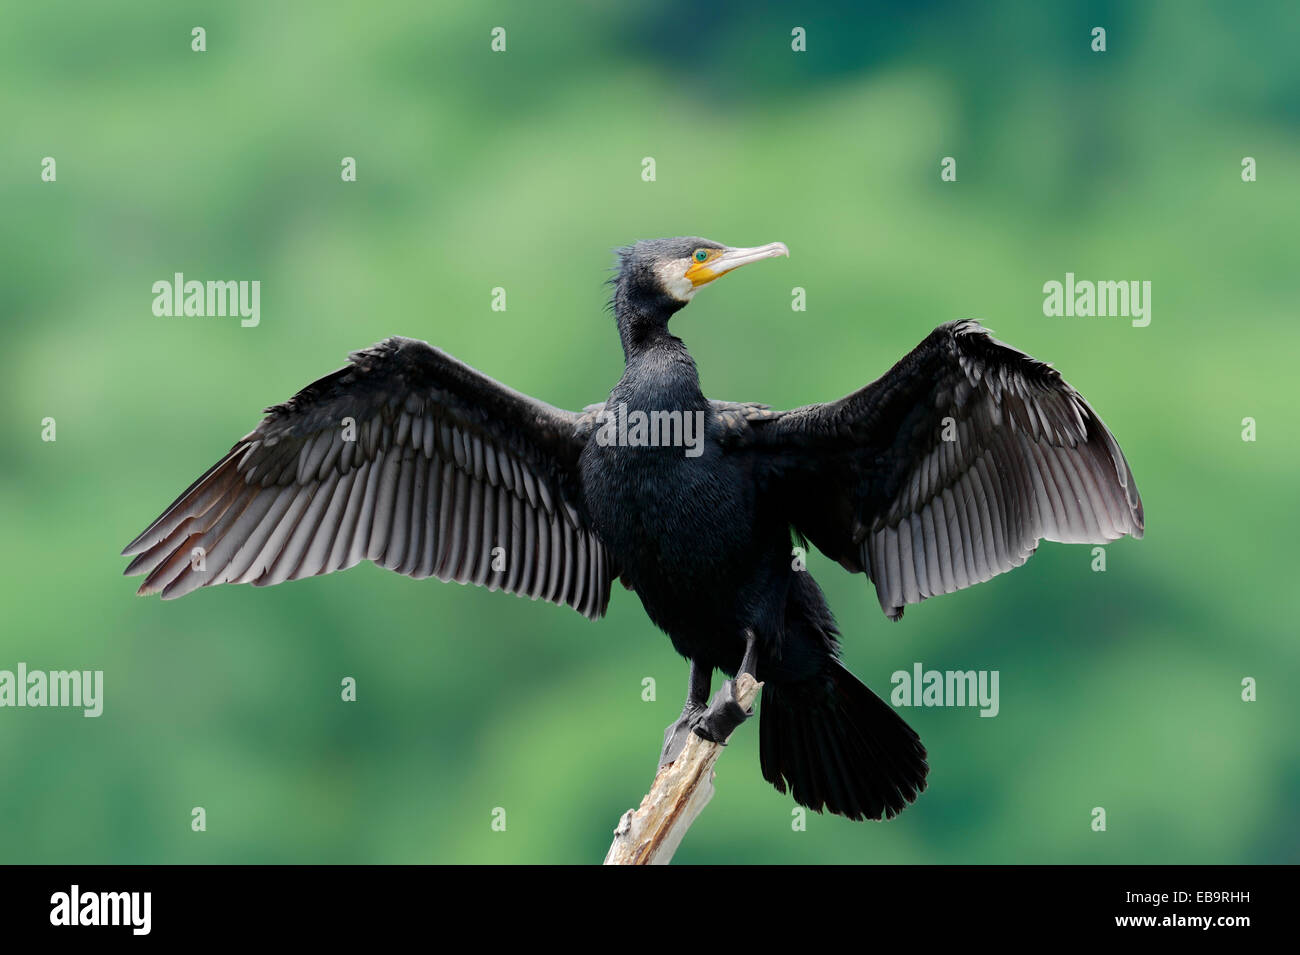 Great Cormorant (Phalacrocorax carbo) with wings outstretched, Central Macedonia, Greece Stock Photo